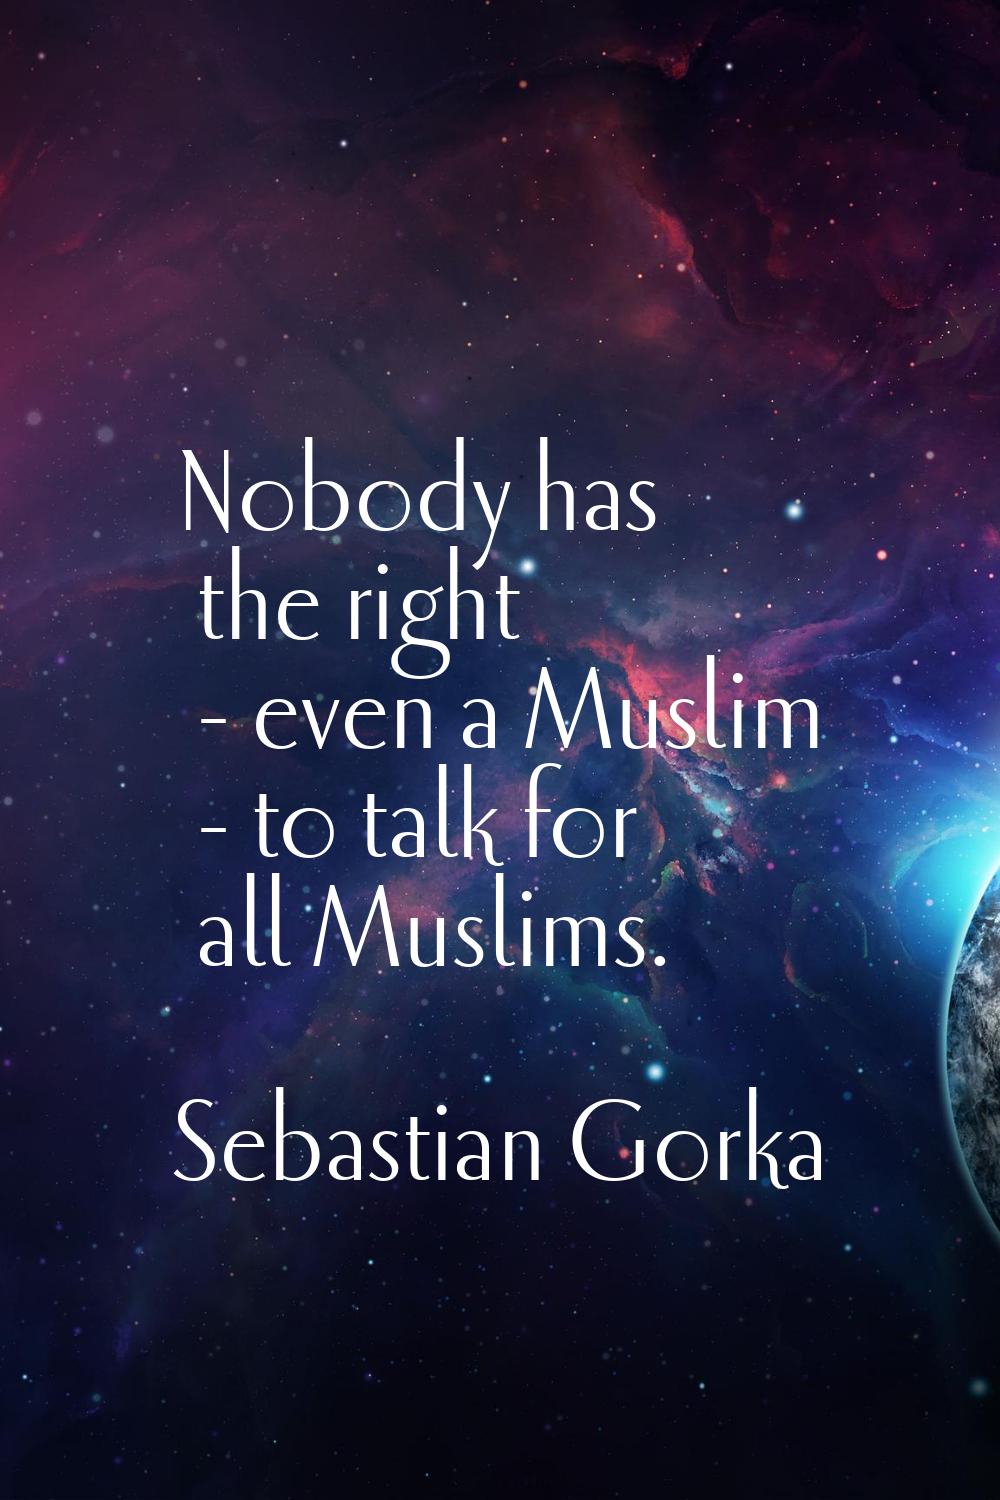 Nobody has the right - even a Muslim - to talk for all Muslims.